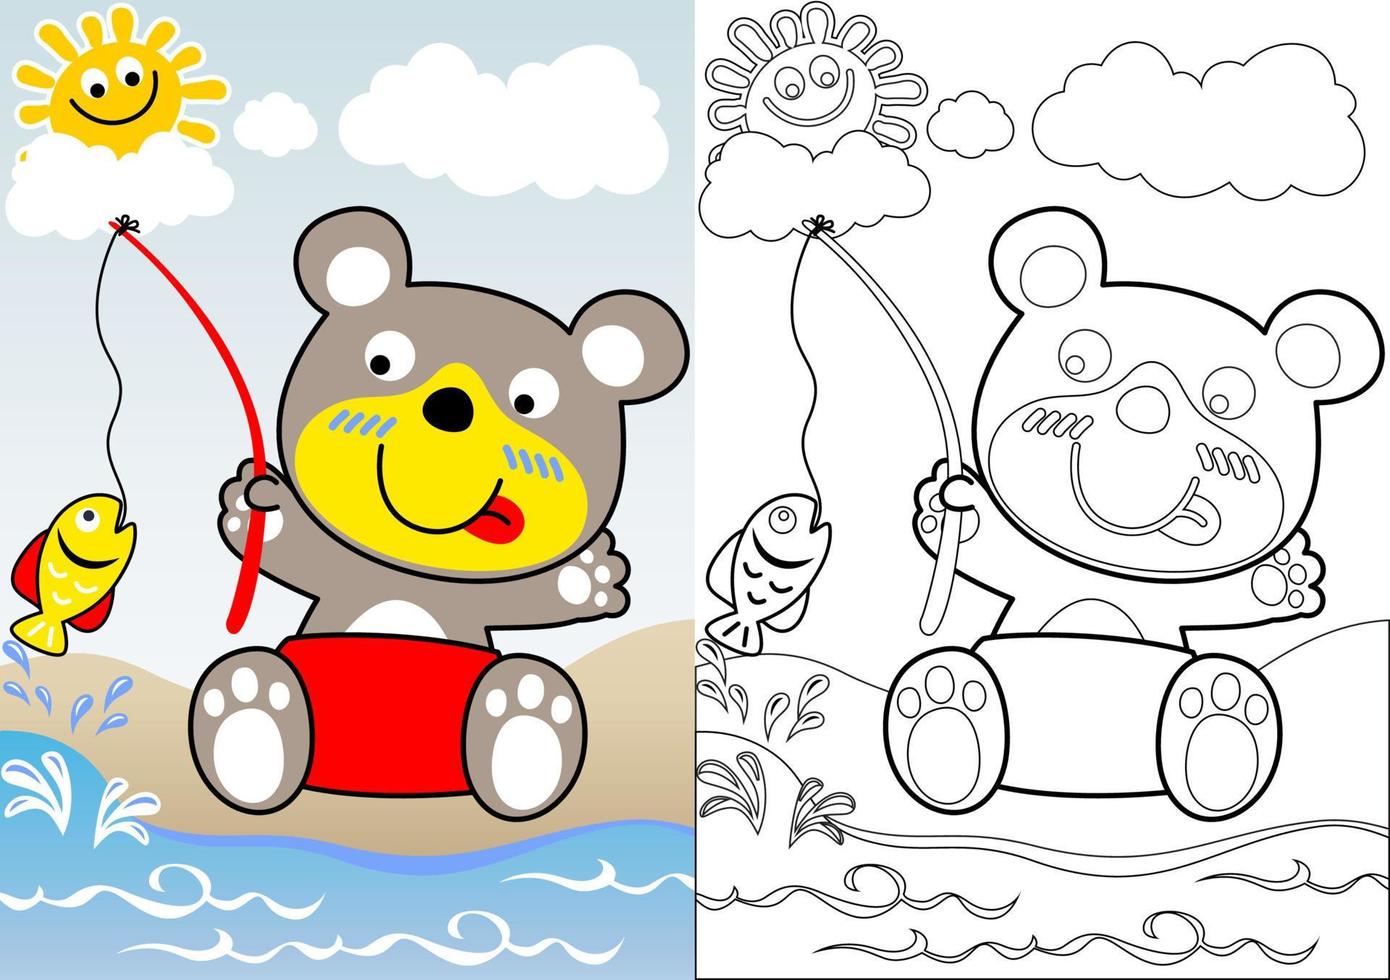 Cute bear fishing on blue sky background, smiling sun behind clouds, coloring book or page, vector cartoon